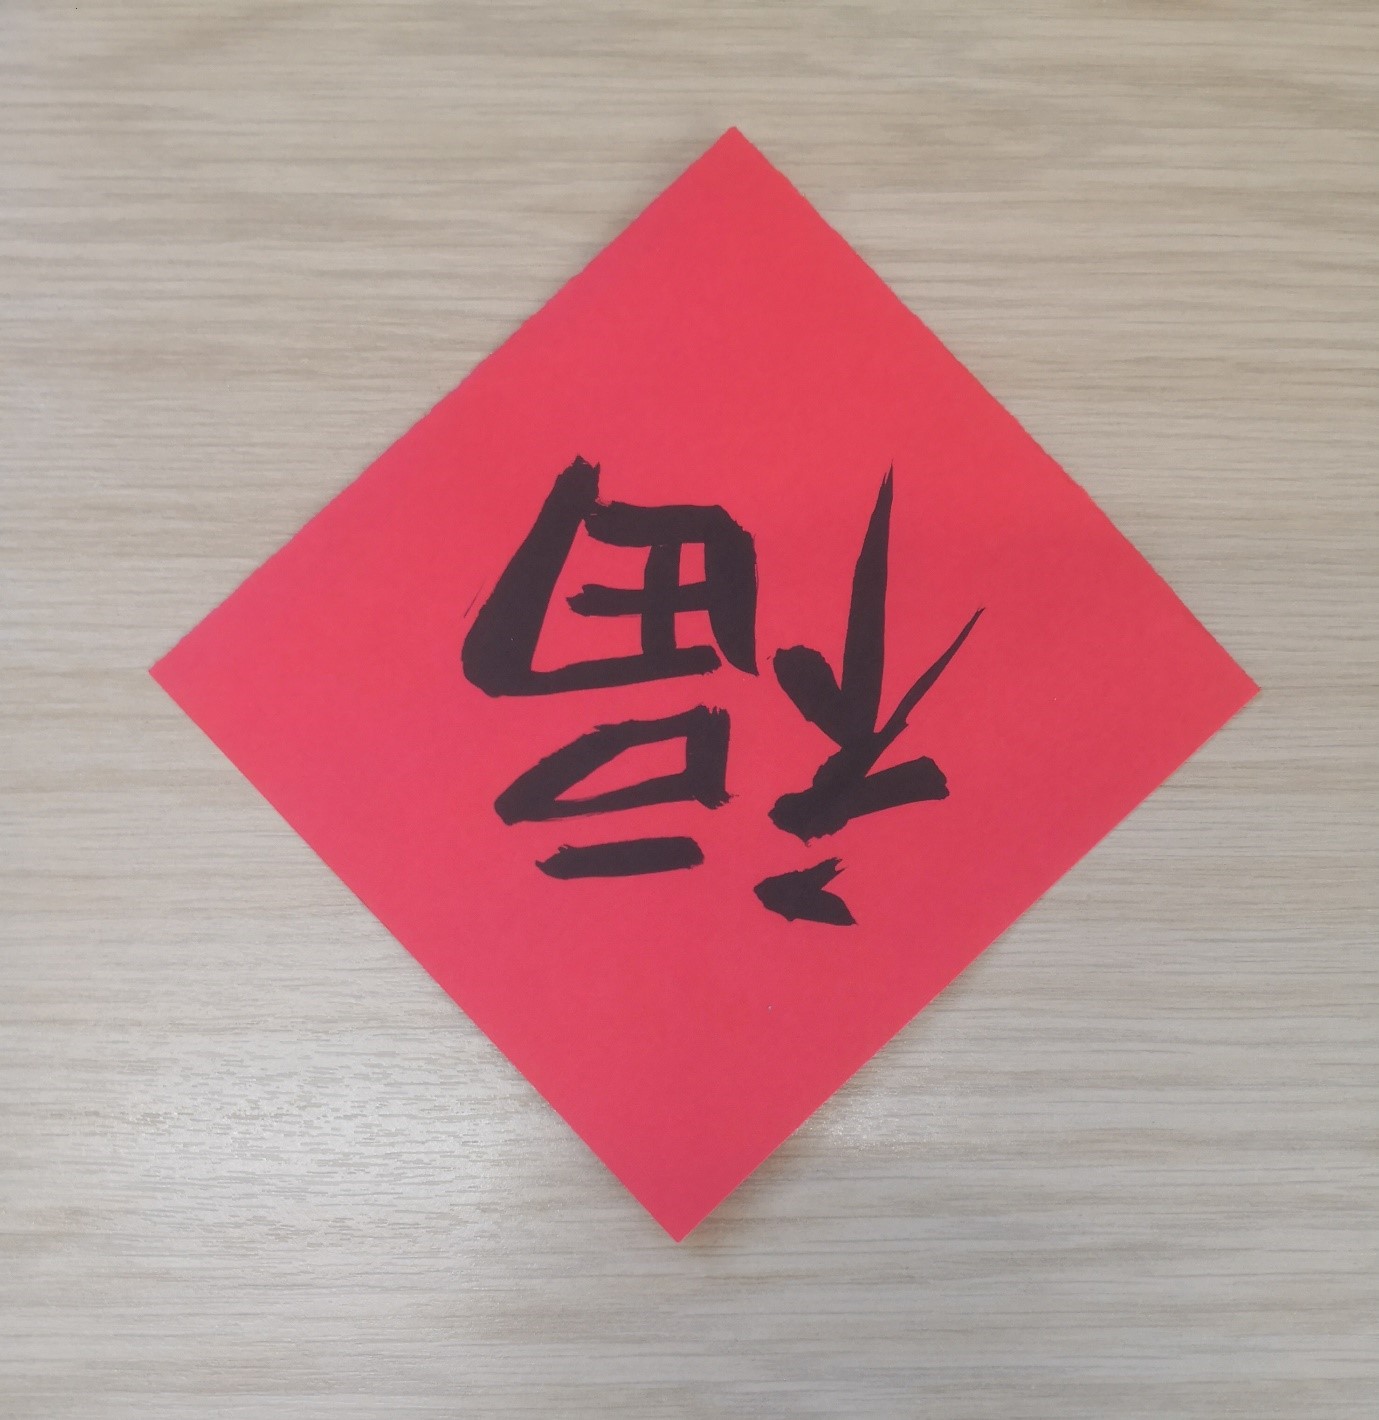 A photograph showing a square of red paper with the character "Fu" painted on in calligraphy and inverted.